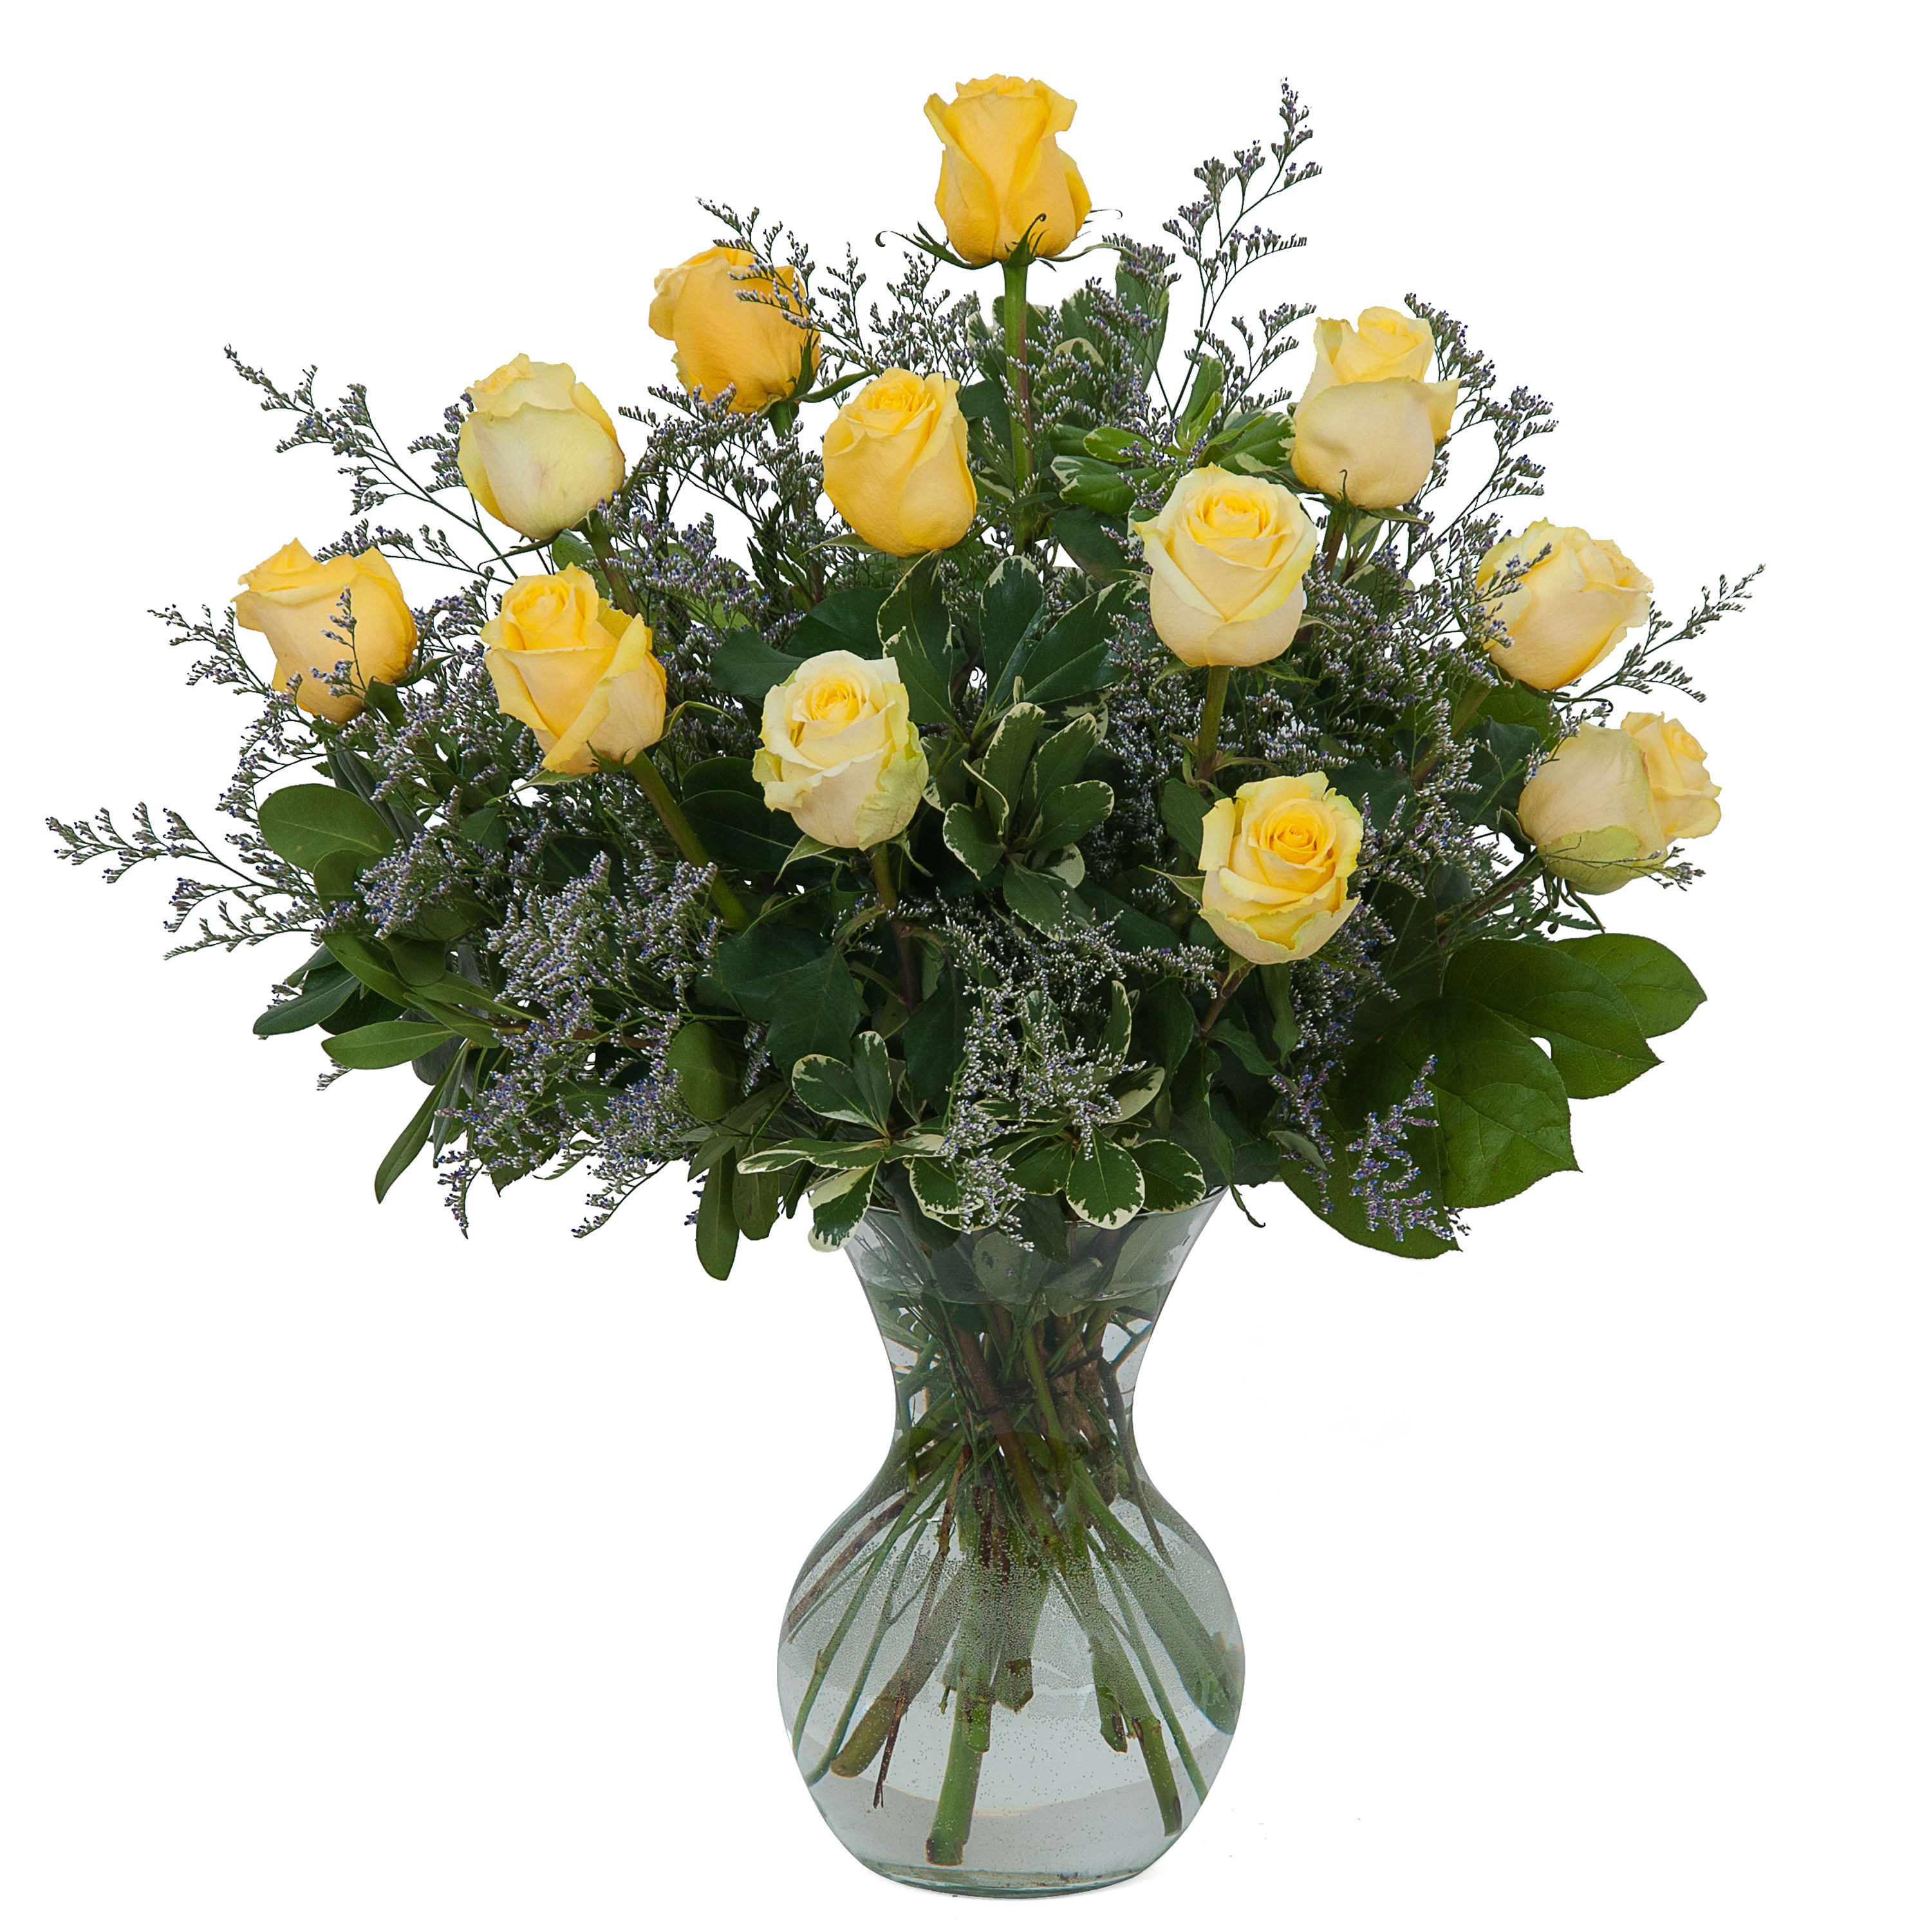 Yellow Rose Beauty - Beautiful Yellow Roses designed with an accent flower in a clear glass vase.TMF-600